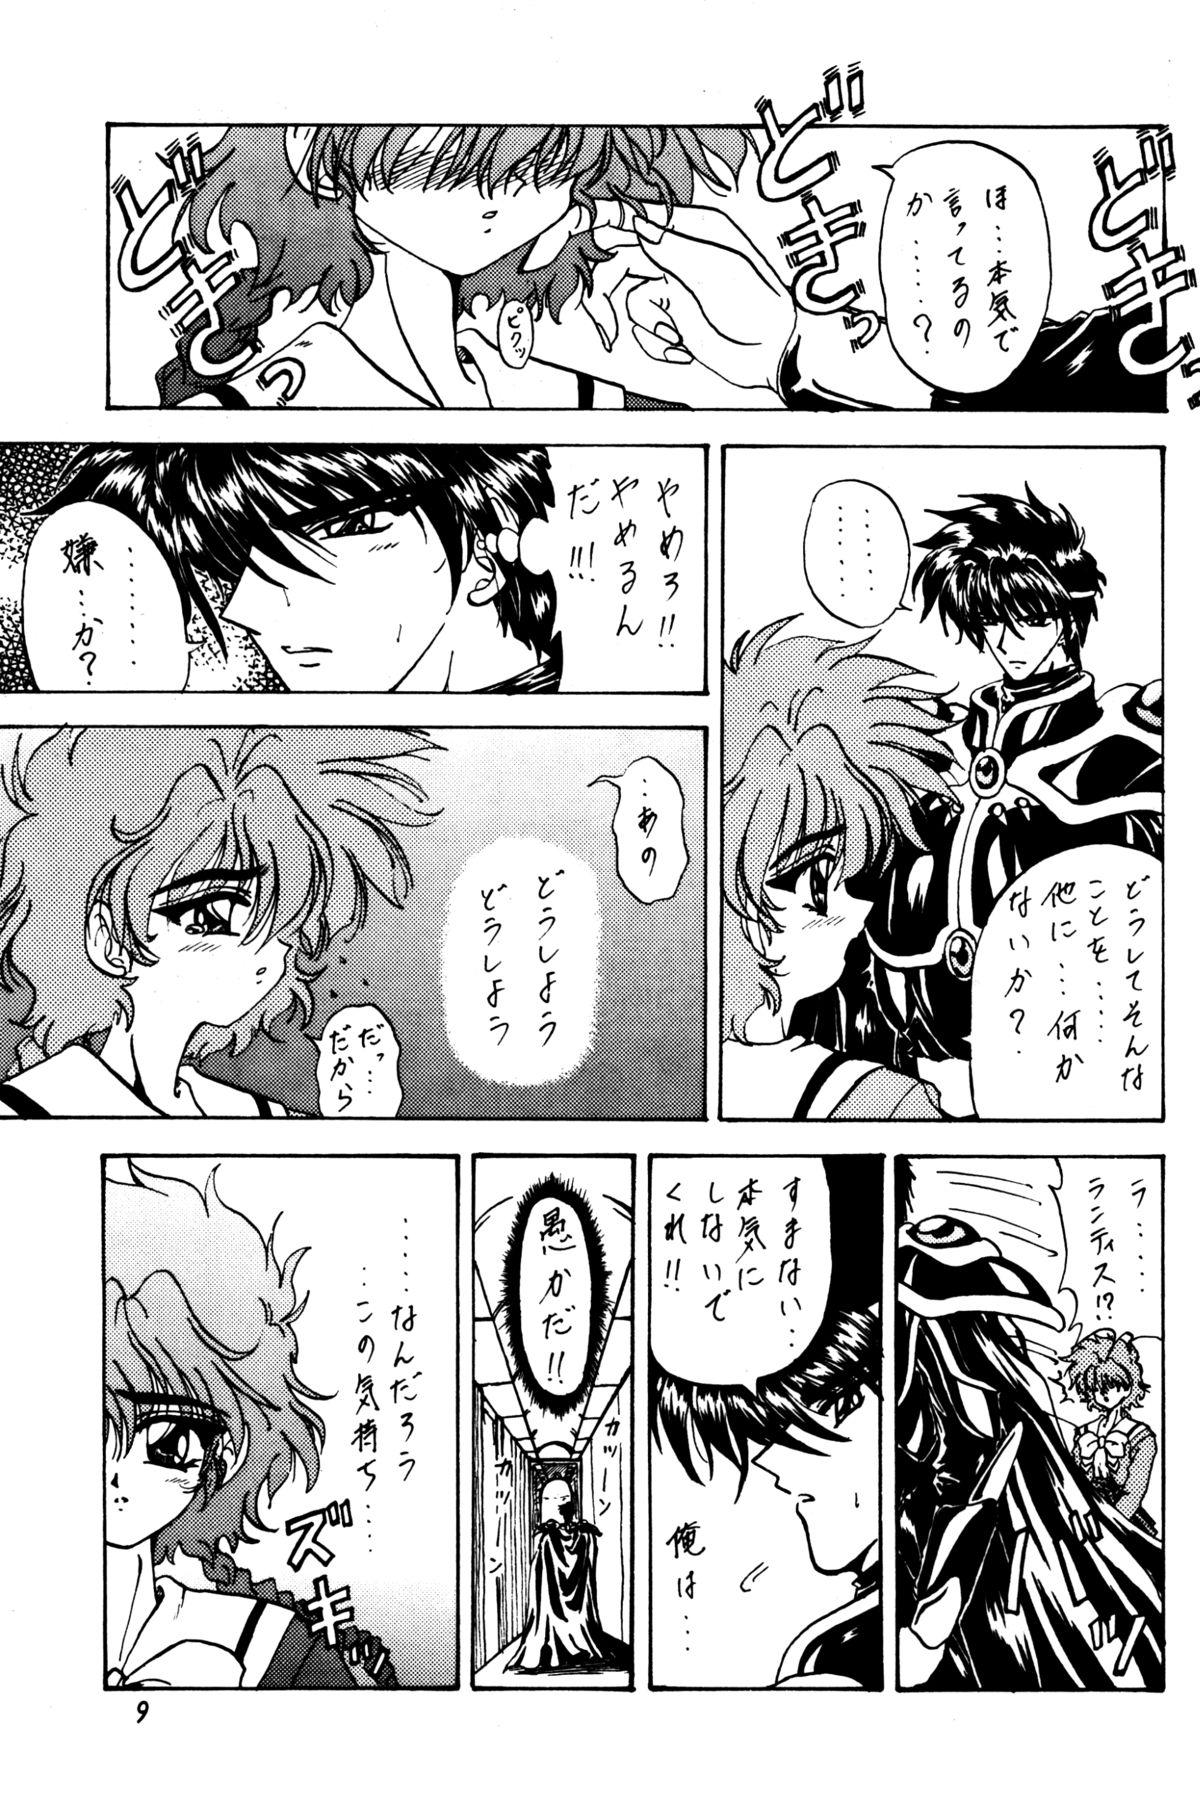 Ass Sex Stale World II - Magic knight rayearth Gay Public - Page 8